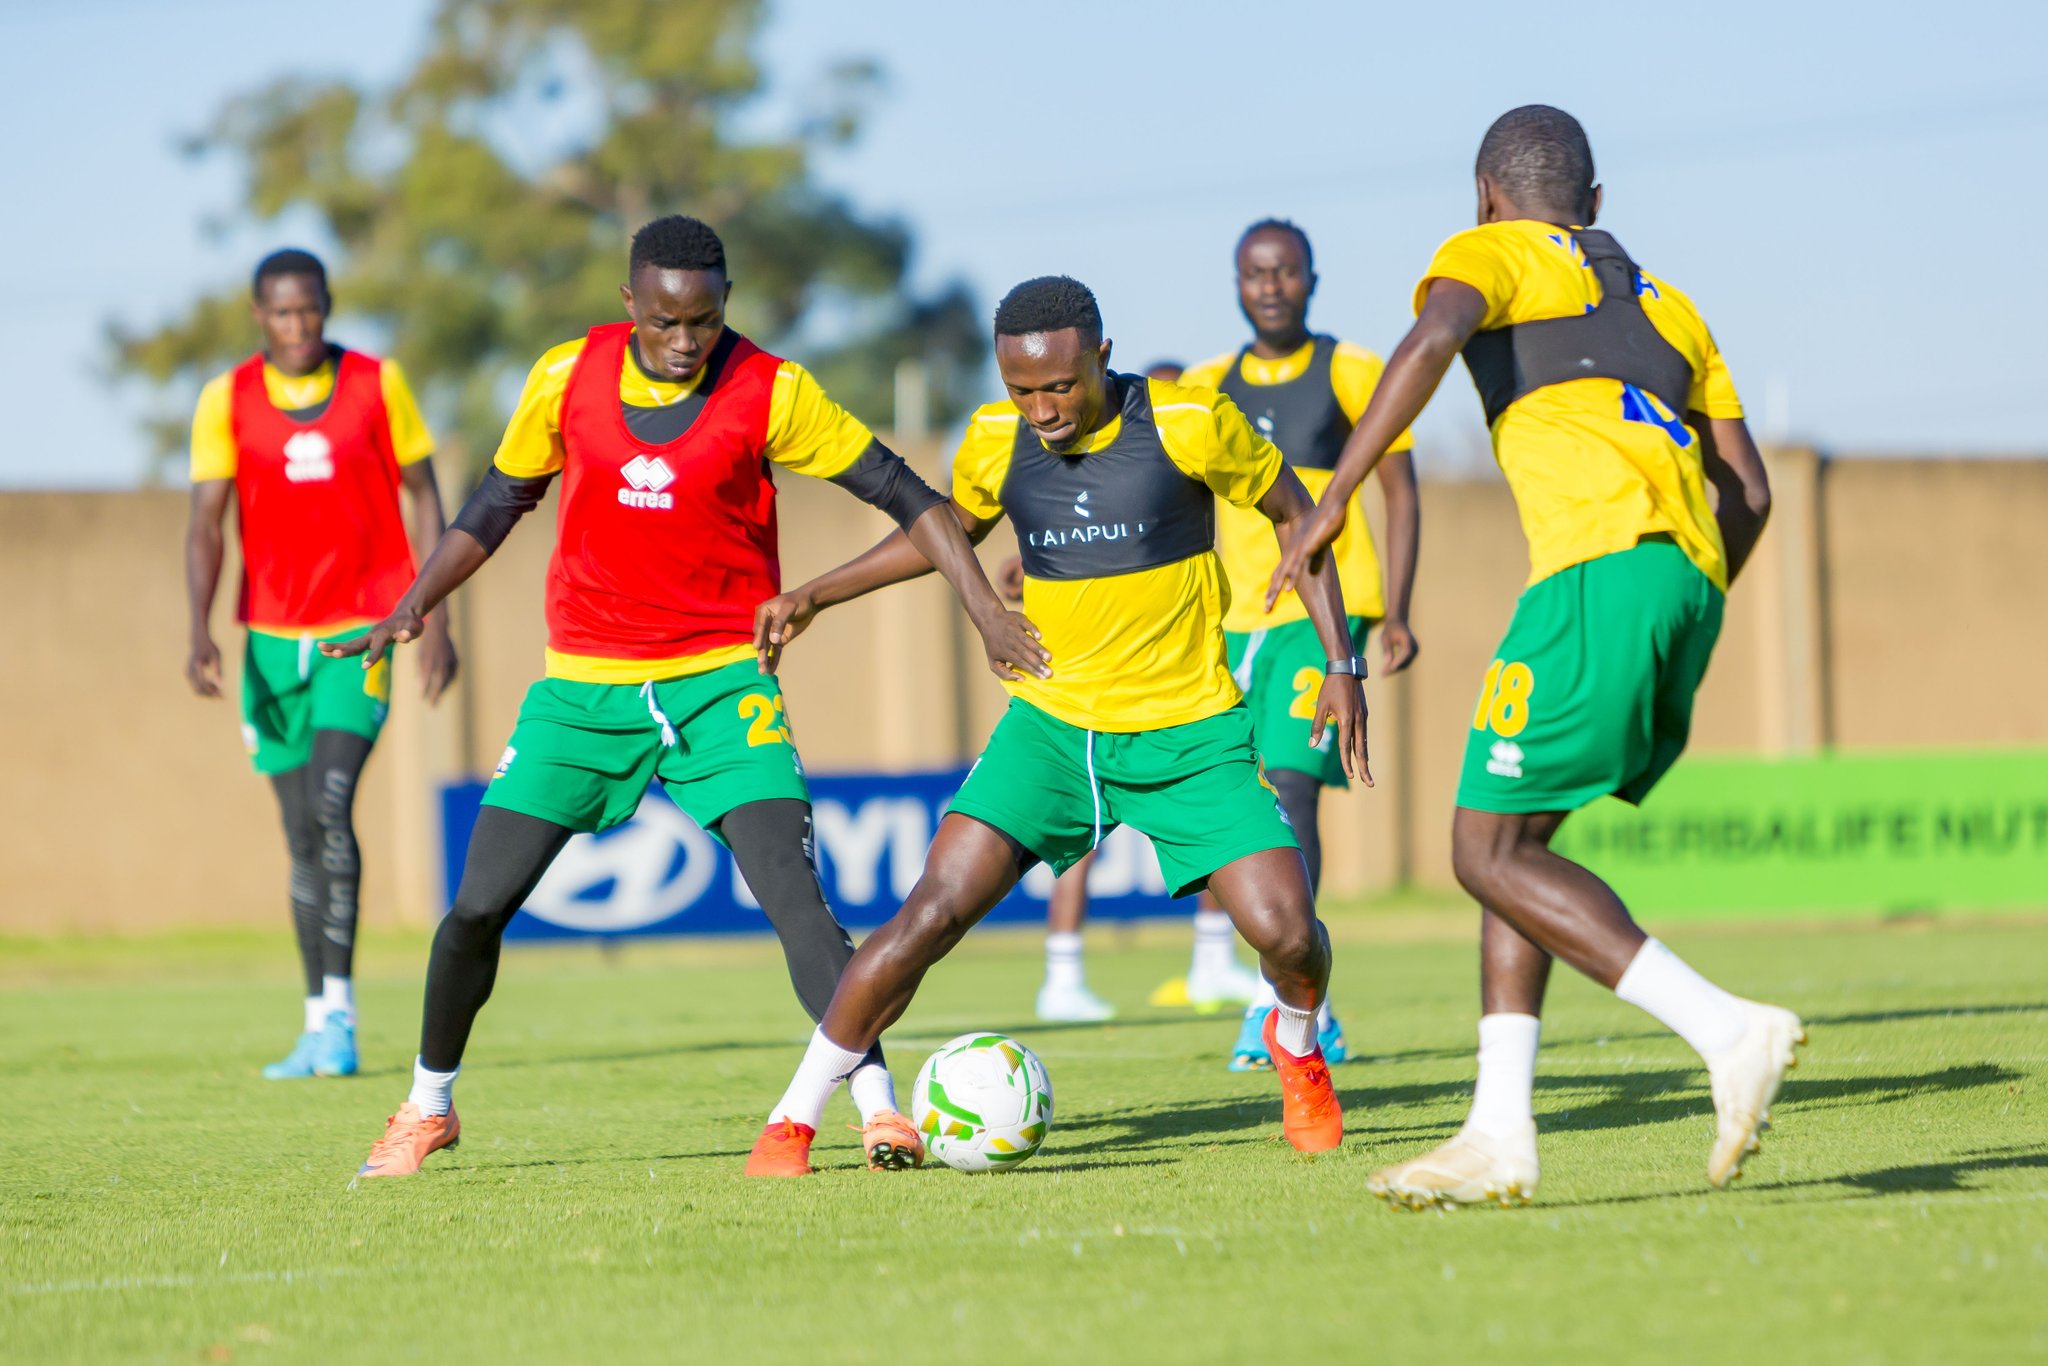 Rwanda National team players during a training session in South Africa ahead of the first league match against Mozambique. Courtesy